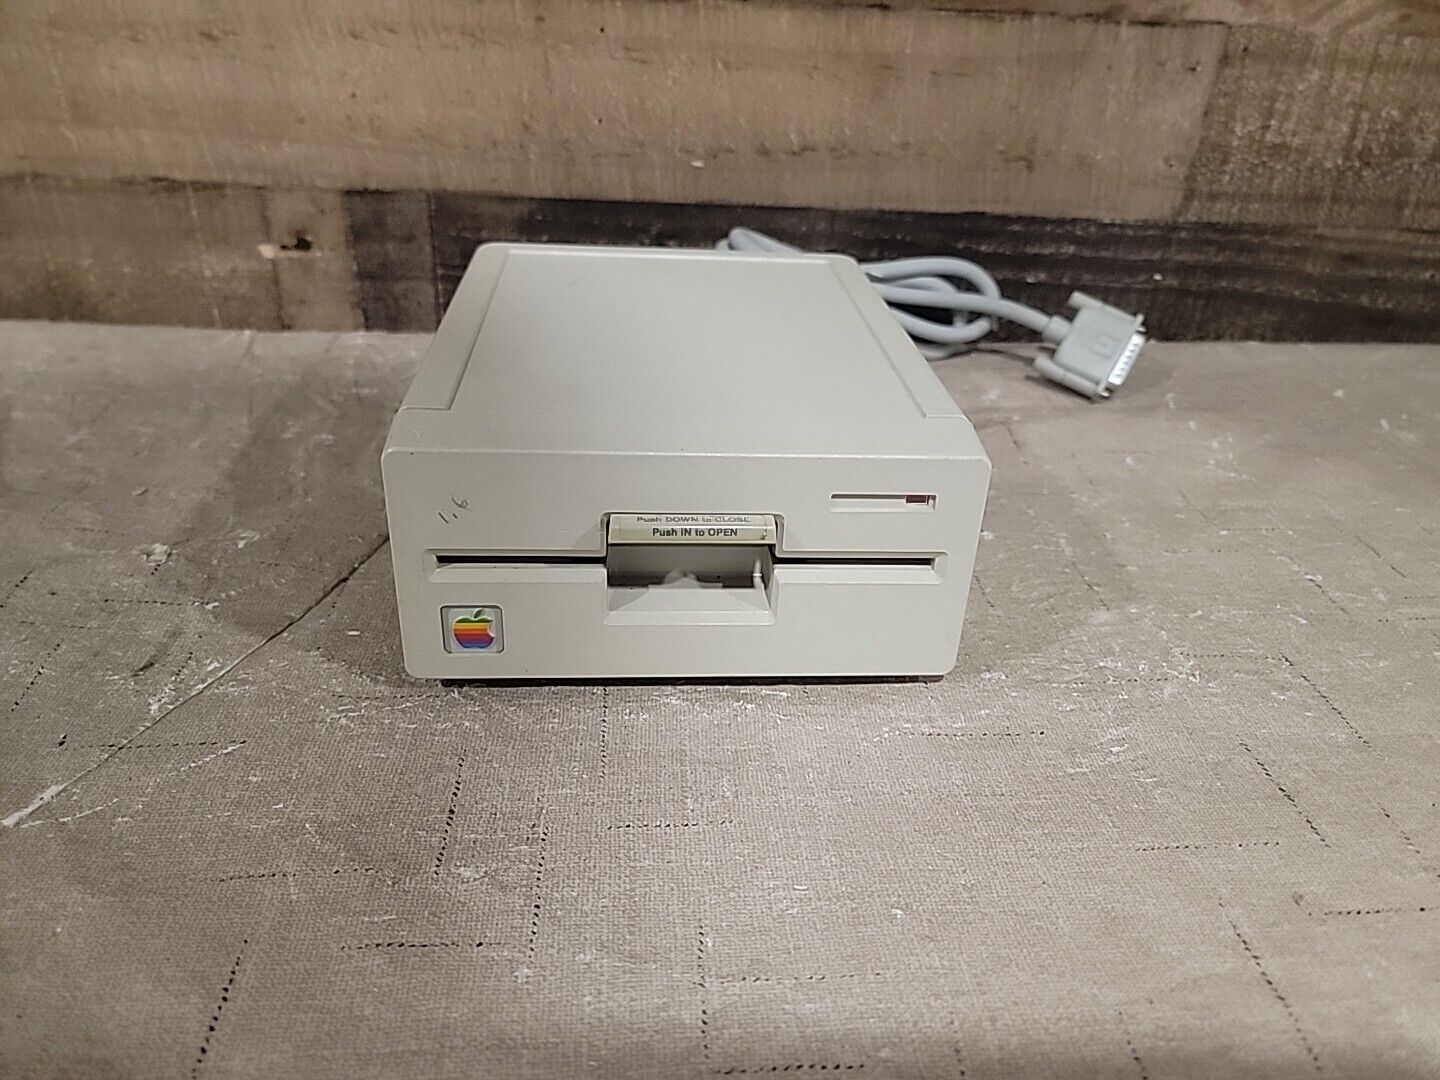 🍎 Apple II 5.25 Floppy Disk Drive Model A9M0107 - Great Condition Tested Works